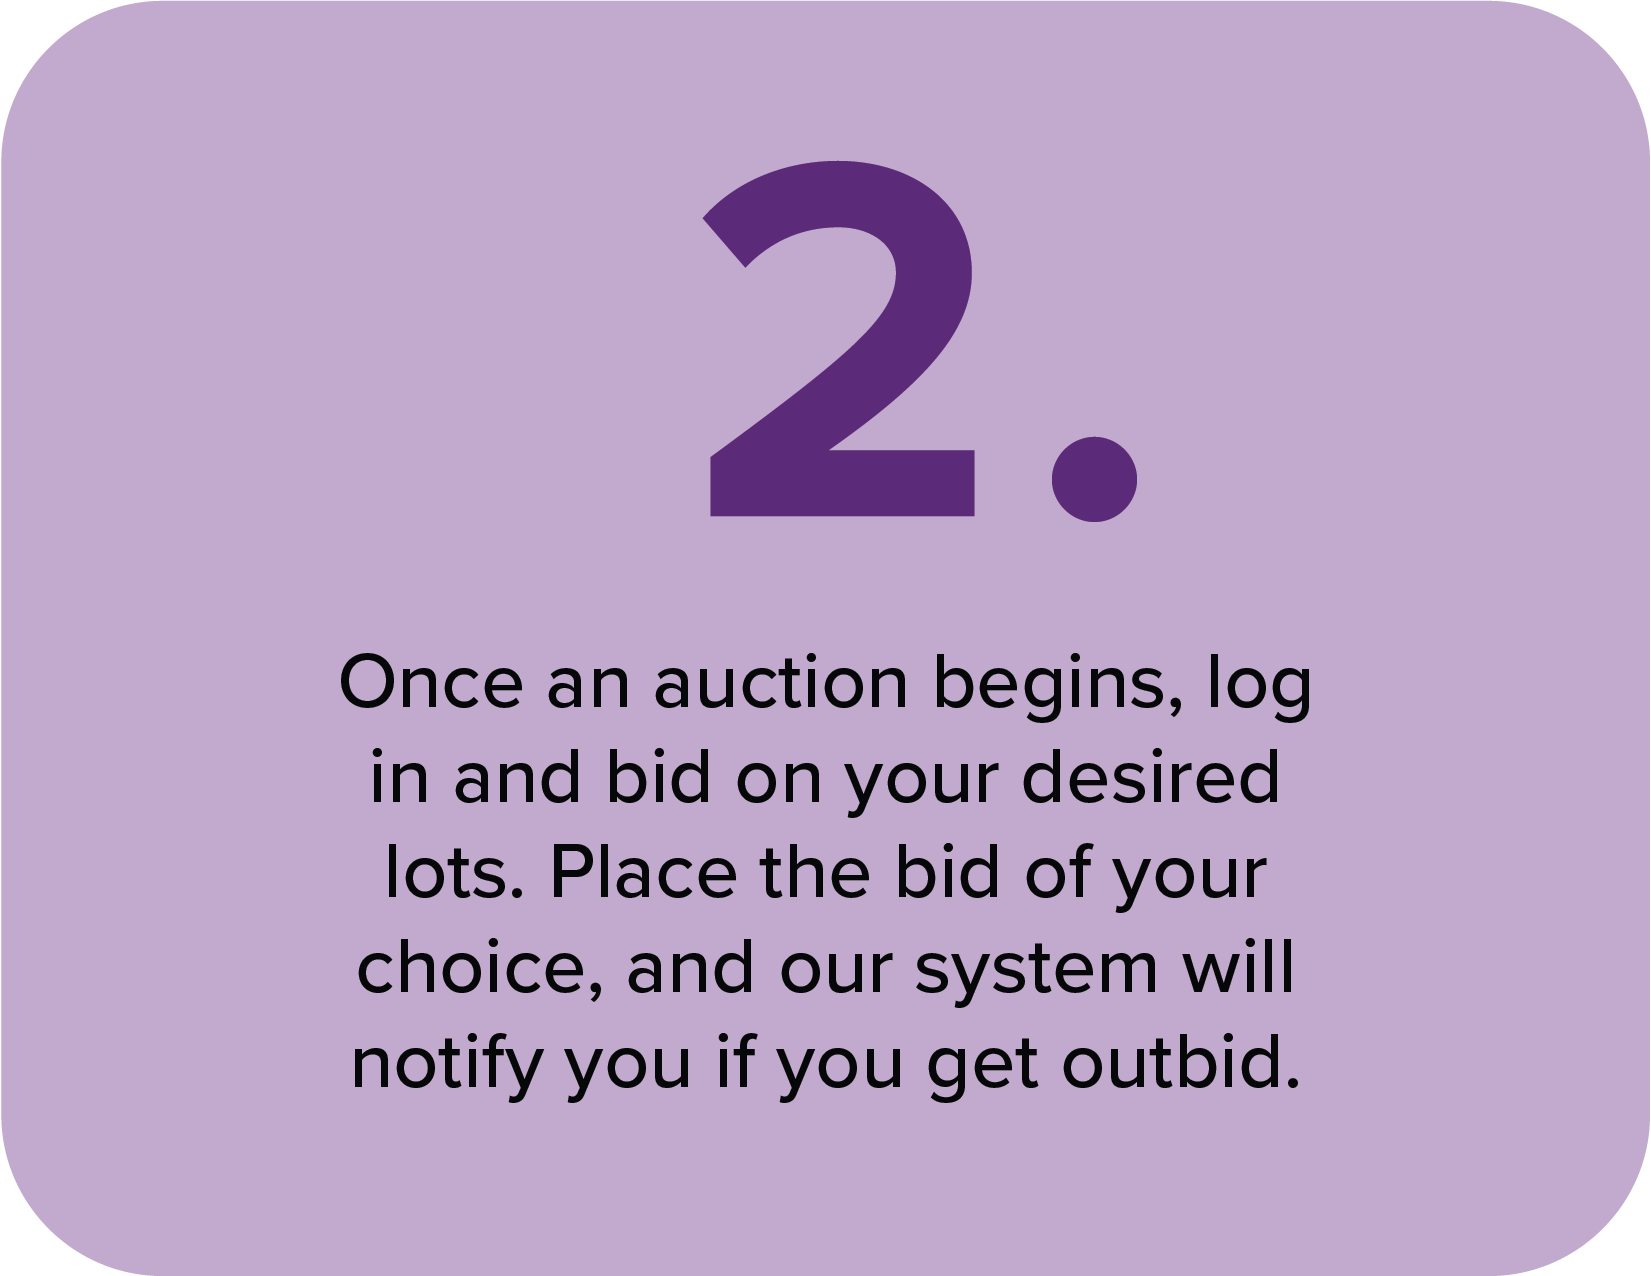 Bid on the lots you want!